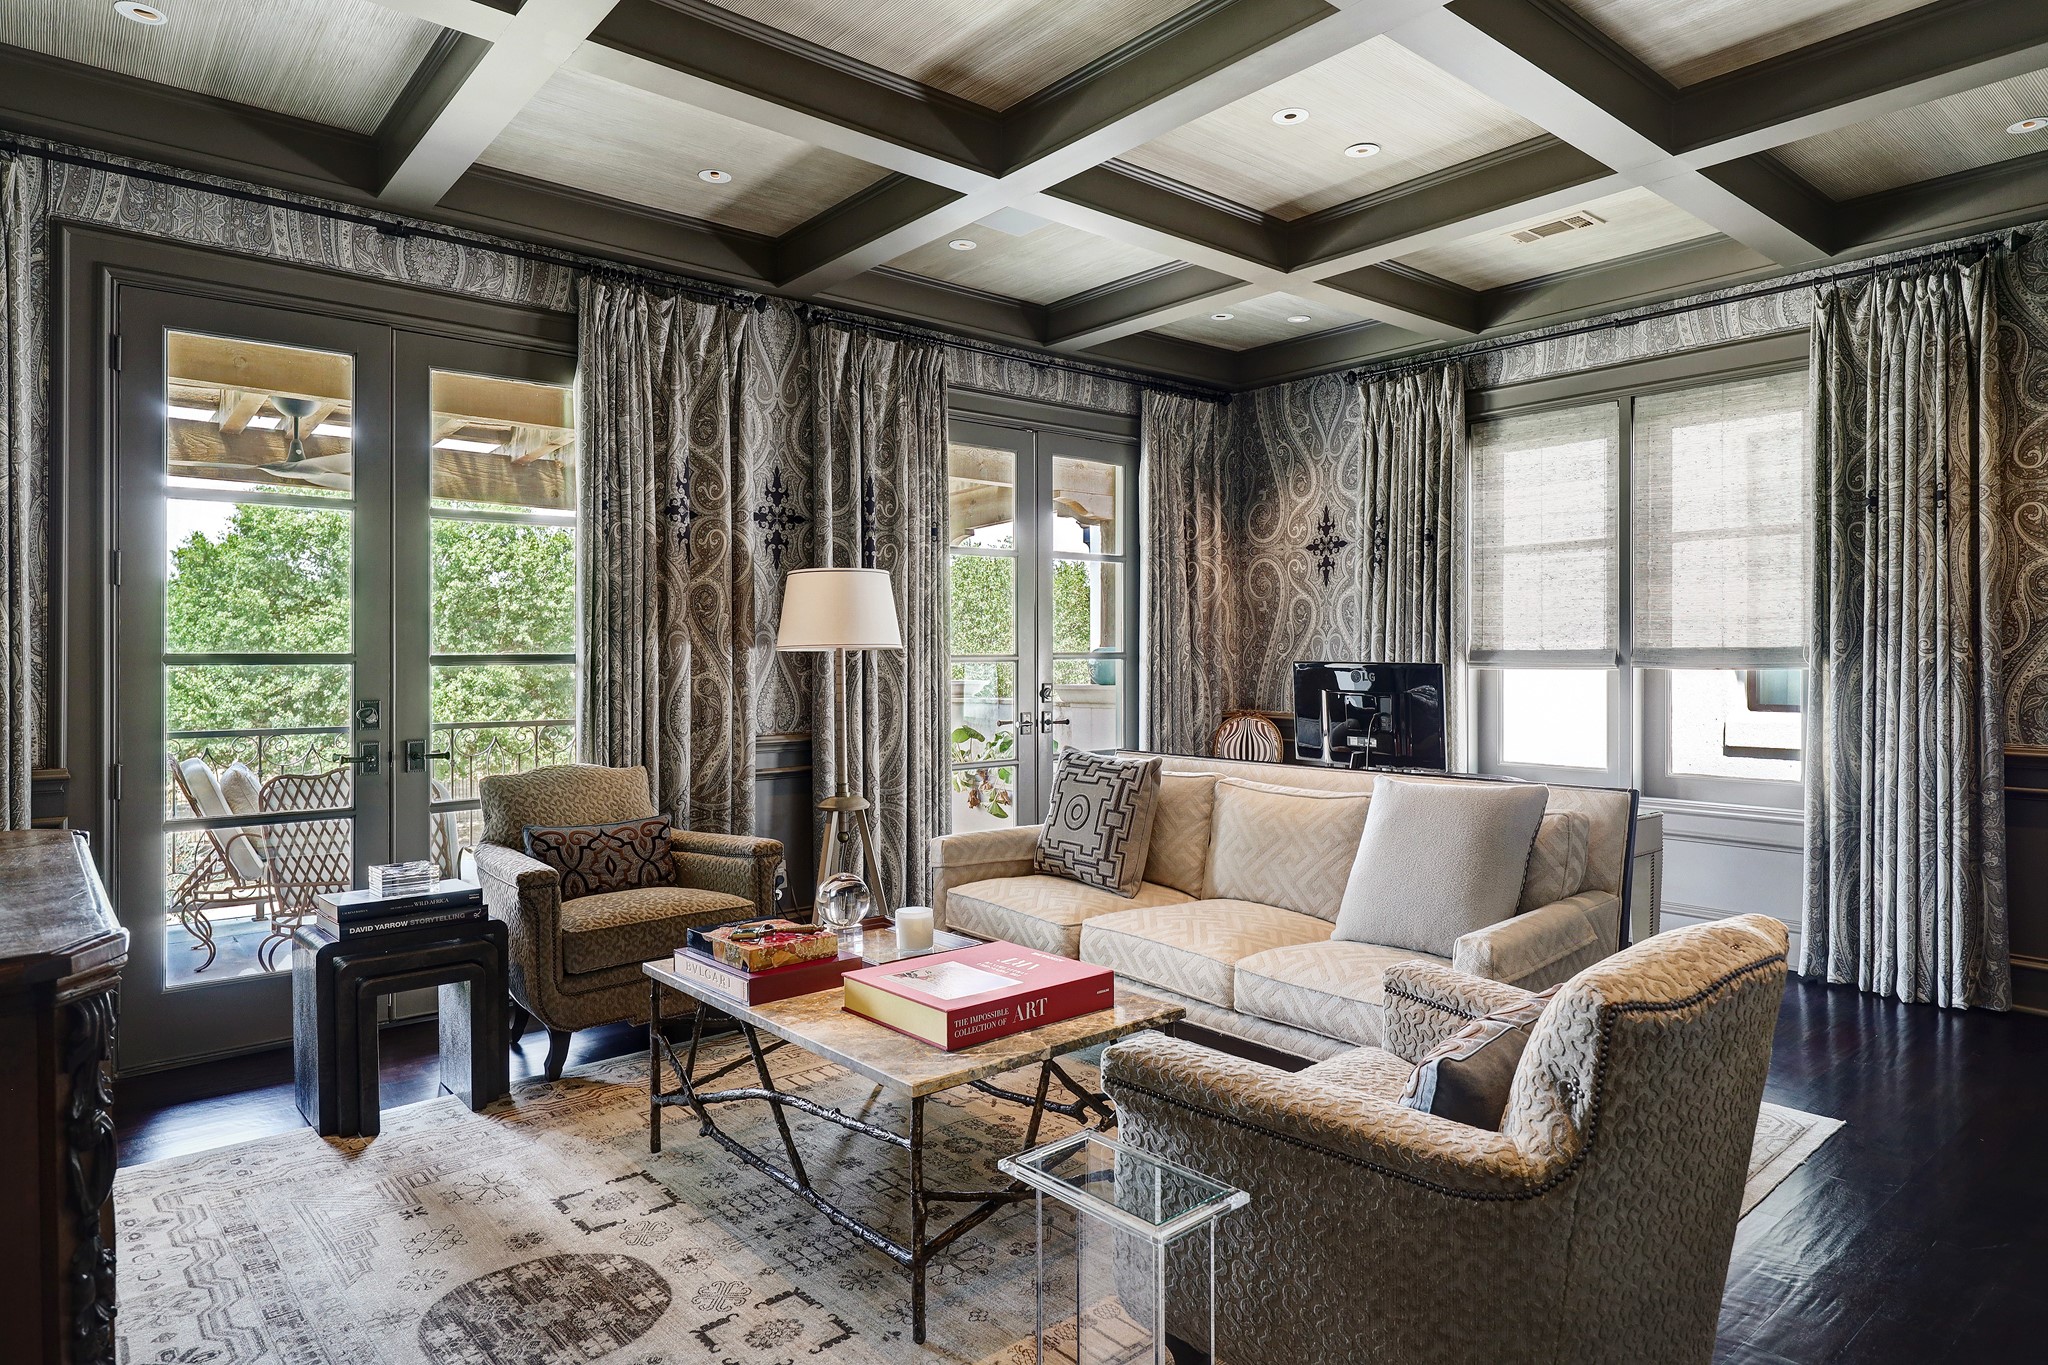 This home office exudes versatility and grandeur yet it retains an allure that hints at potential for relaxation and recreation. Above, the coffered ceilings stand as a testament to architectural brilliance. Elegant fabric-paneled walls encircle the room creating a cocoon of serenity, while the hand-scraped hardwood floors ground the room in authenticity and charm. Two sets of French doors grant access to the upstairs terrace and offer views of the expansive park setting beyond.